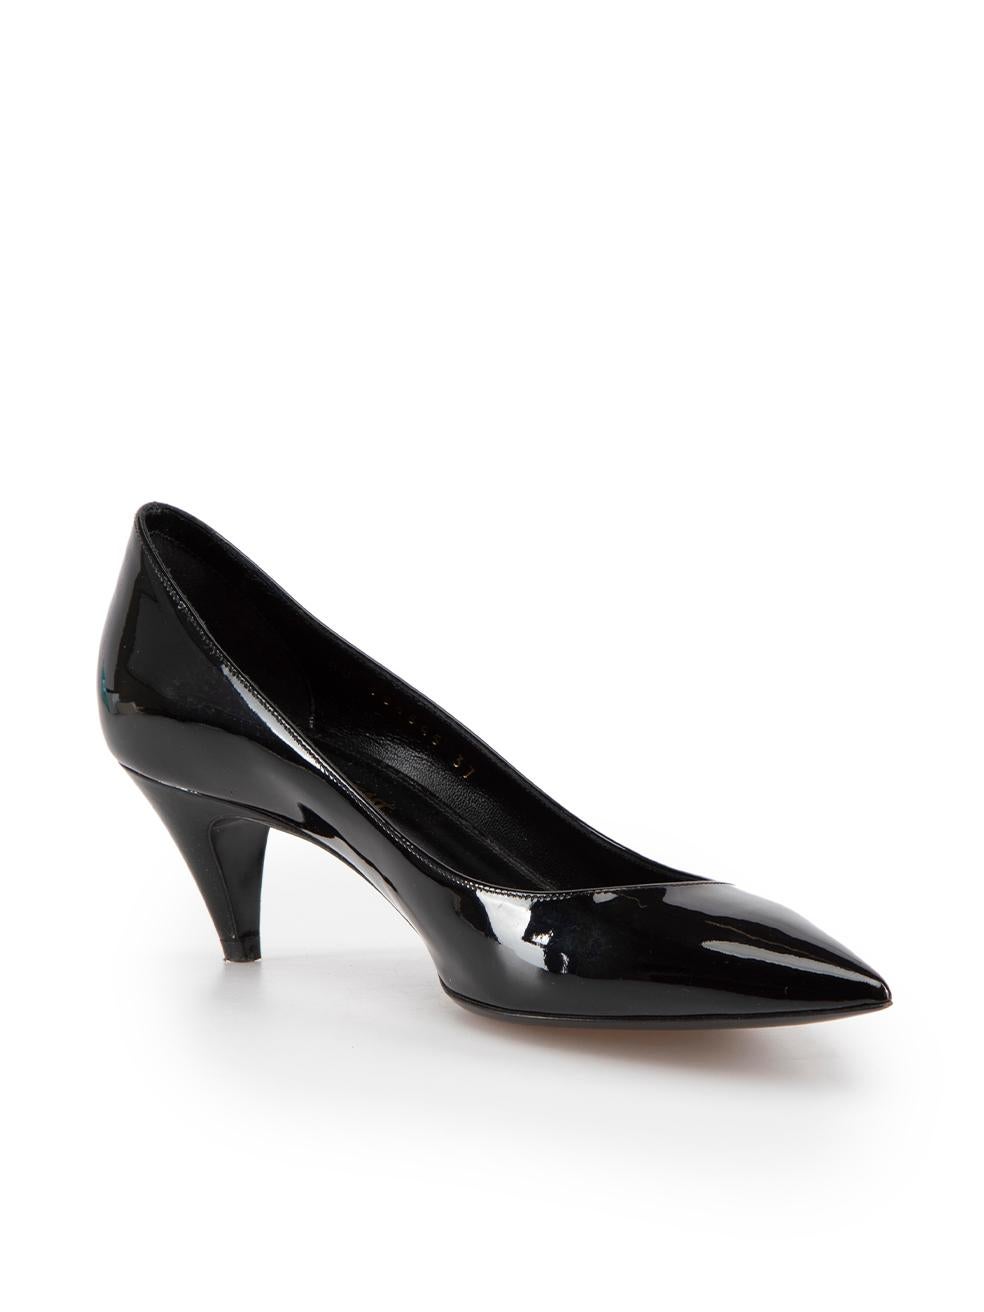 CONDITION is Very good. Minimal wear to shoes is evident. Minimal wear to both shoe heel tips with abrasions and the right heel tip is twisted on this used Saint Laurent designer resale item.
 
 Details
 Kiki
 Black
 Patent leather
 Pumps
 Kitten